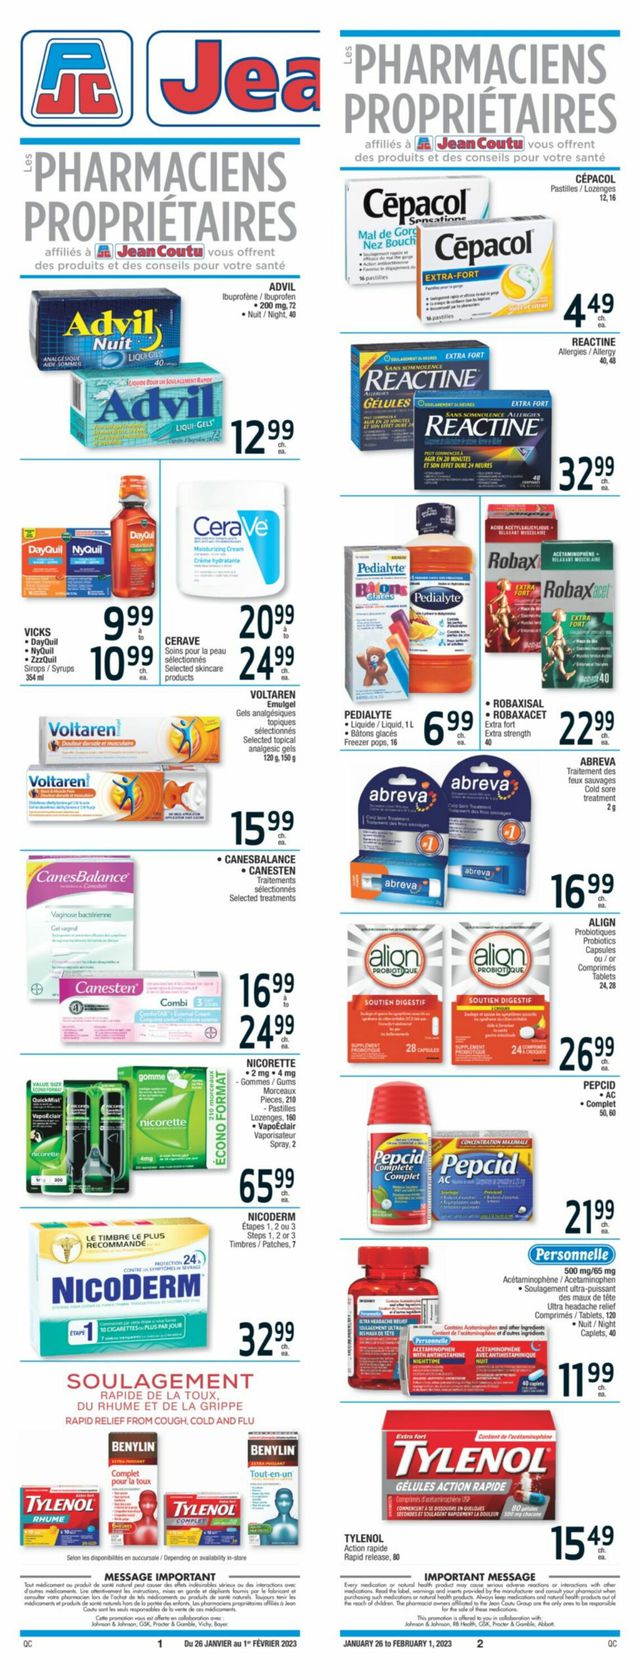 Jean Coutu Flyer from 01/26/2023